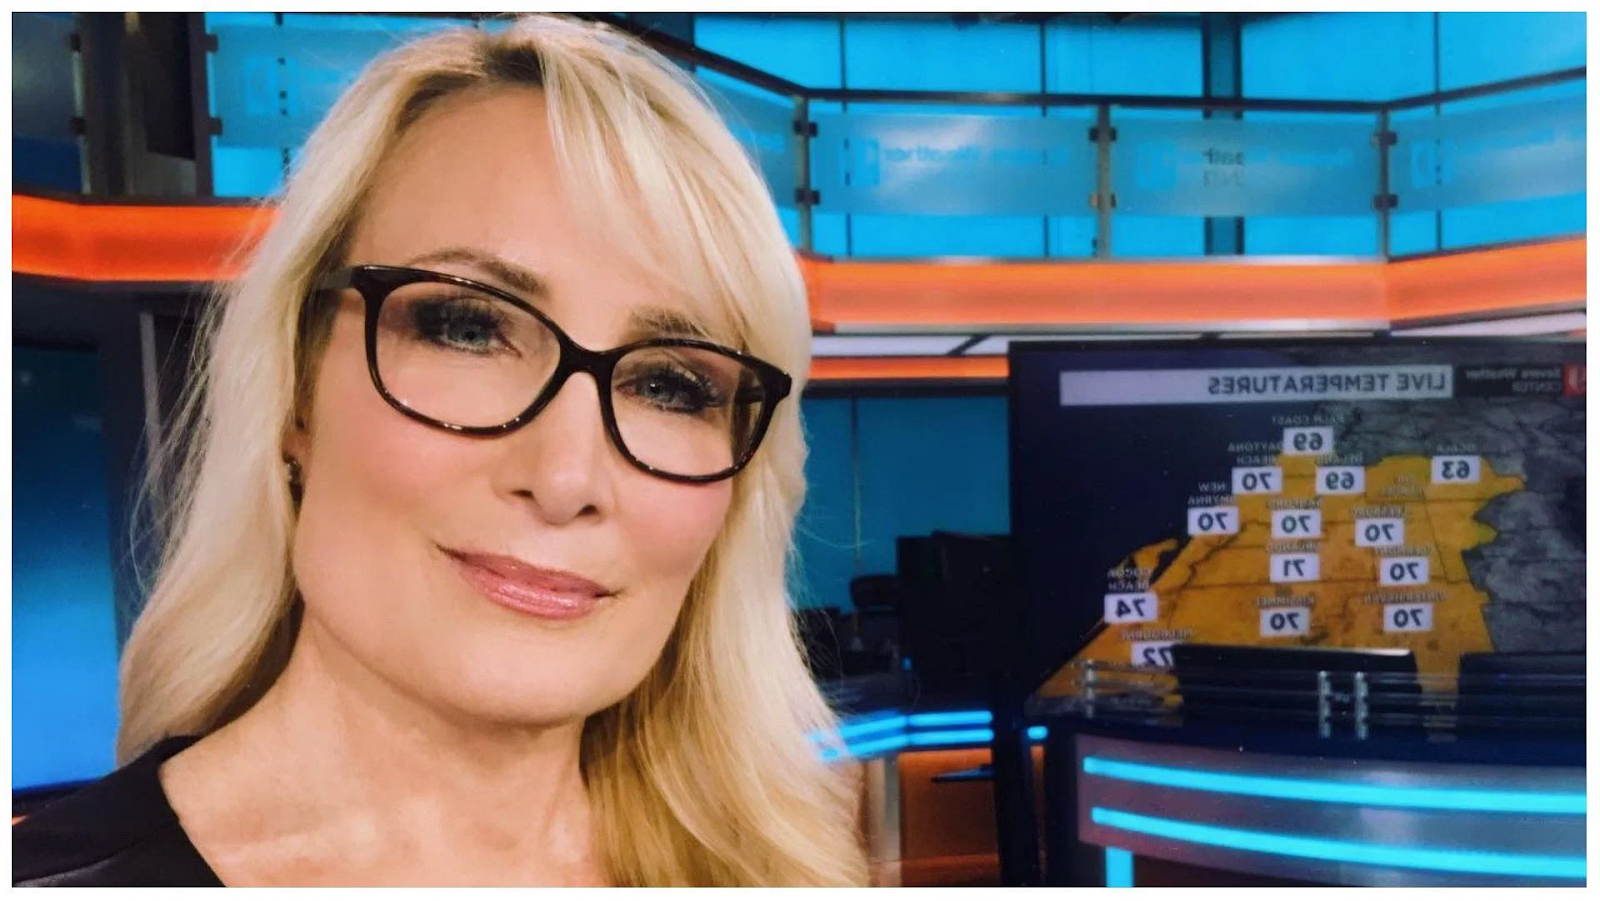 Who was Angela Jacobs? Angela Jacobs, a reporter and anchor for WFTV lost her fight against metastatic breast cancer on Tuesday, July 19, 2022